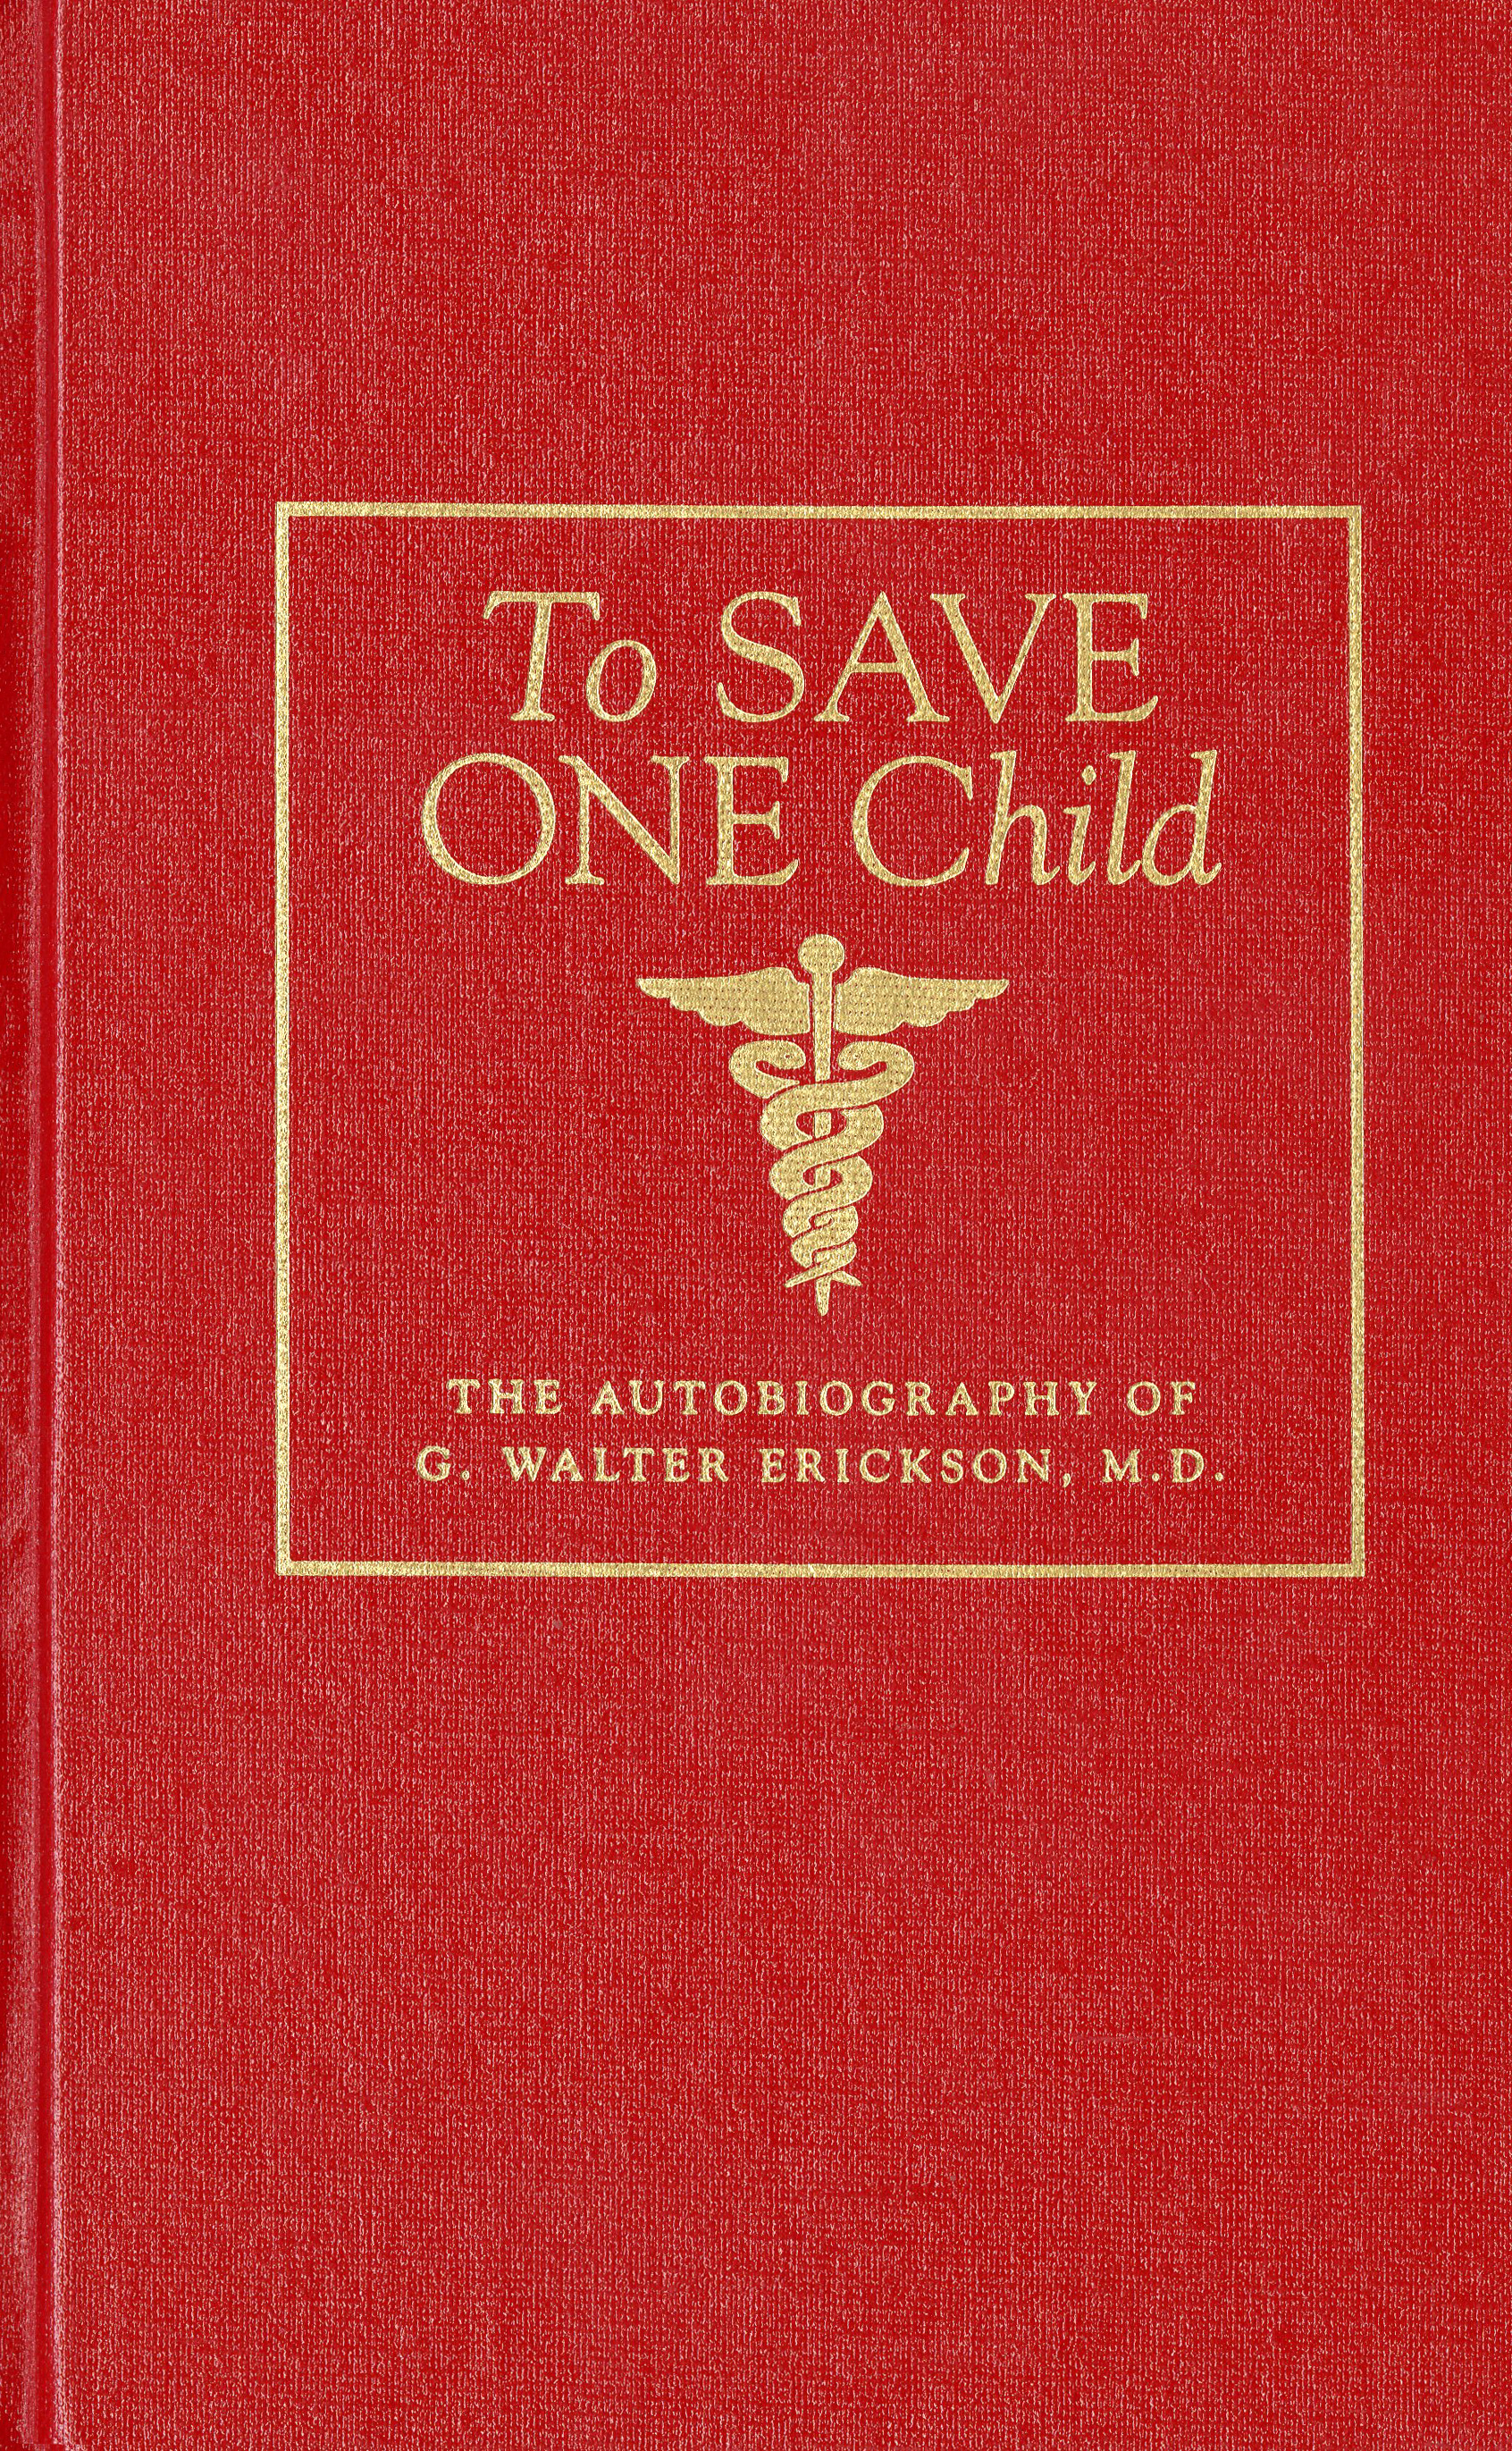 Cover of To Save One Child: The Autobiography of G. Walter Erickson, M.D